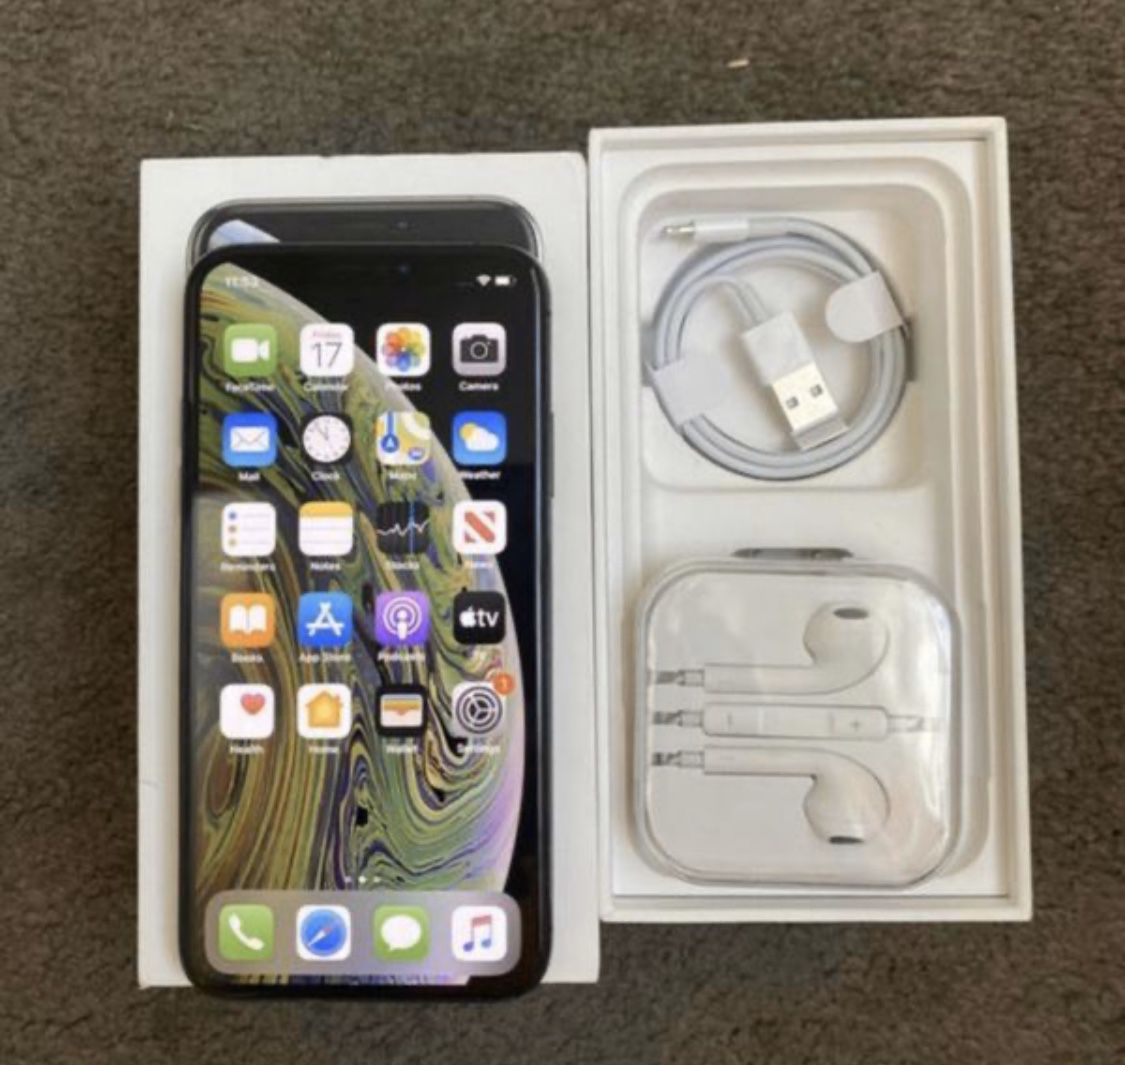 iPhone XS 10s 64gb for sprint,virgin & boost mobile only. Phone is a 9 out of 10 no cracks & works perfect with new accessories 420$